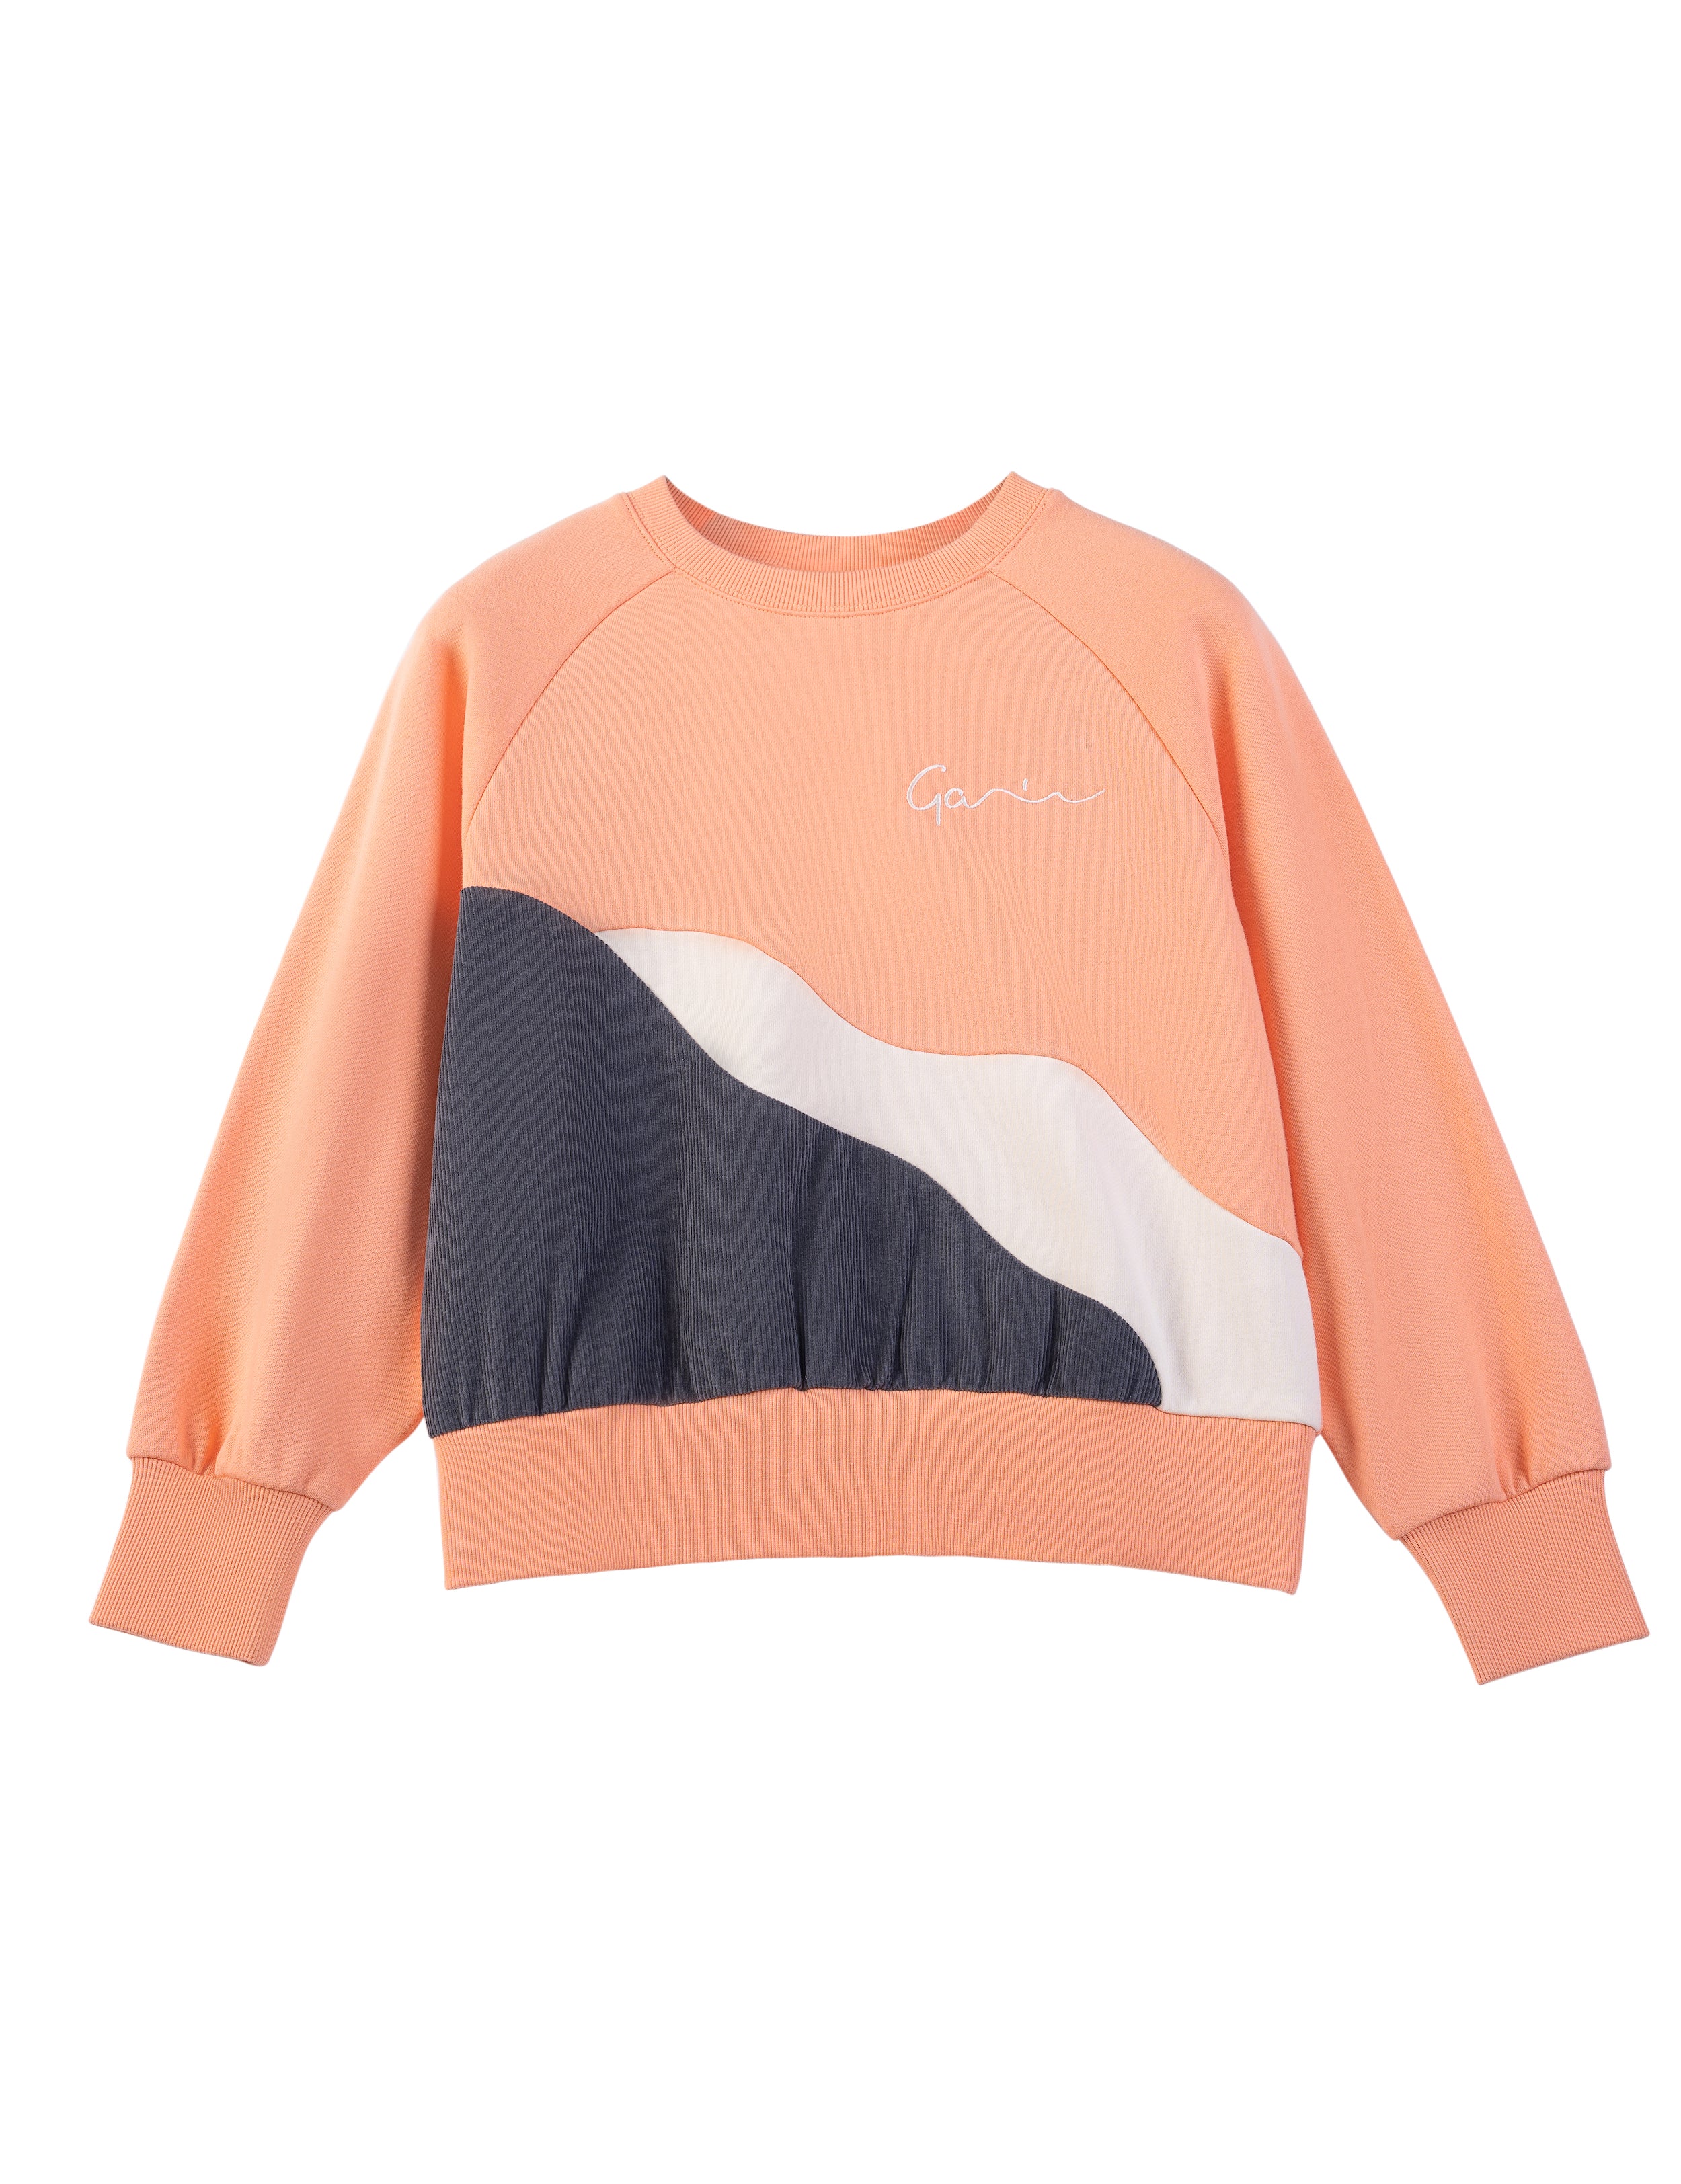 Lena Threaded Sweater in Coral Reef